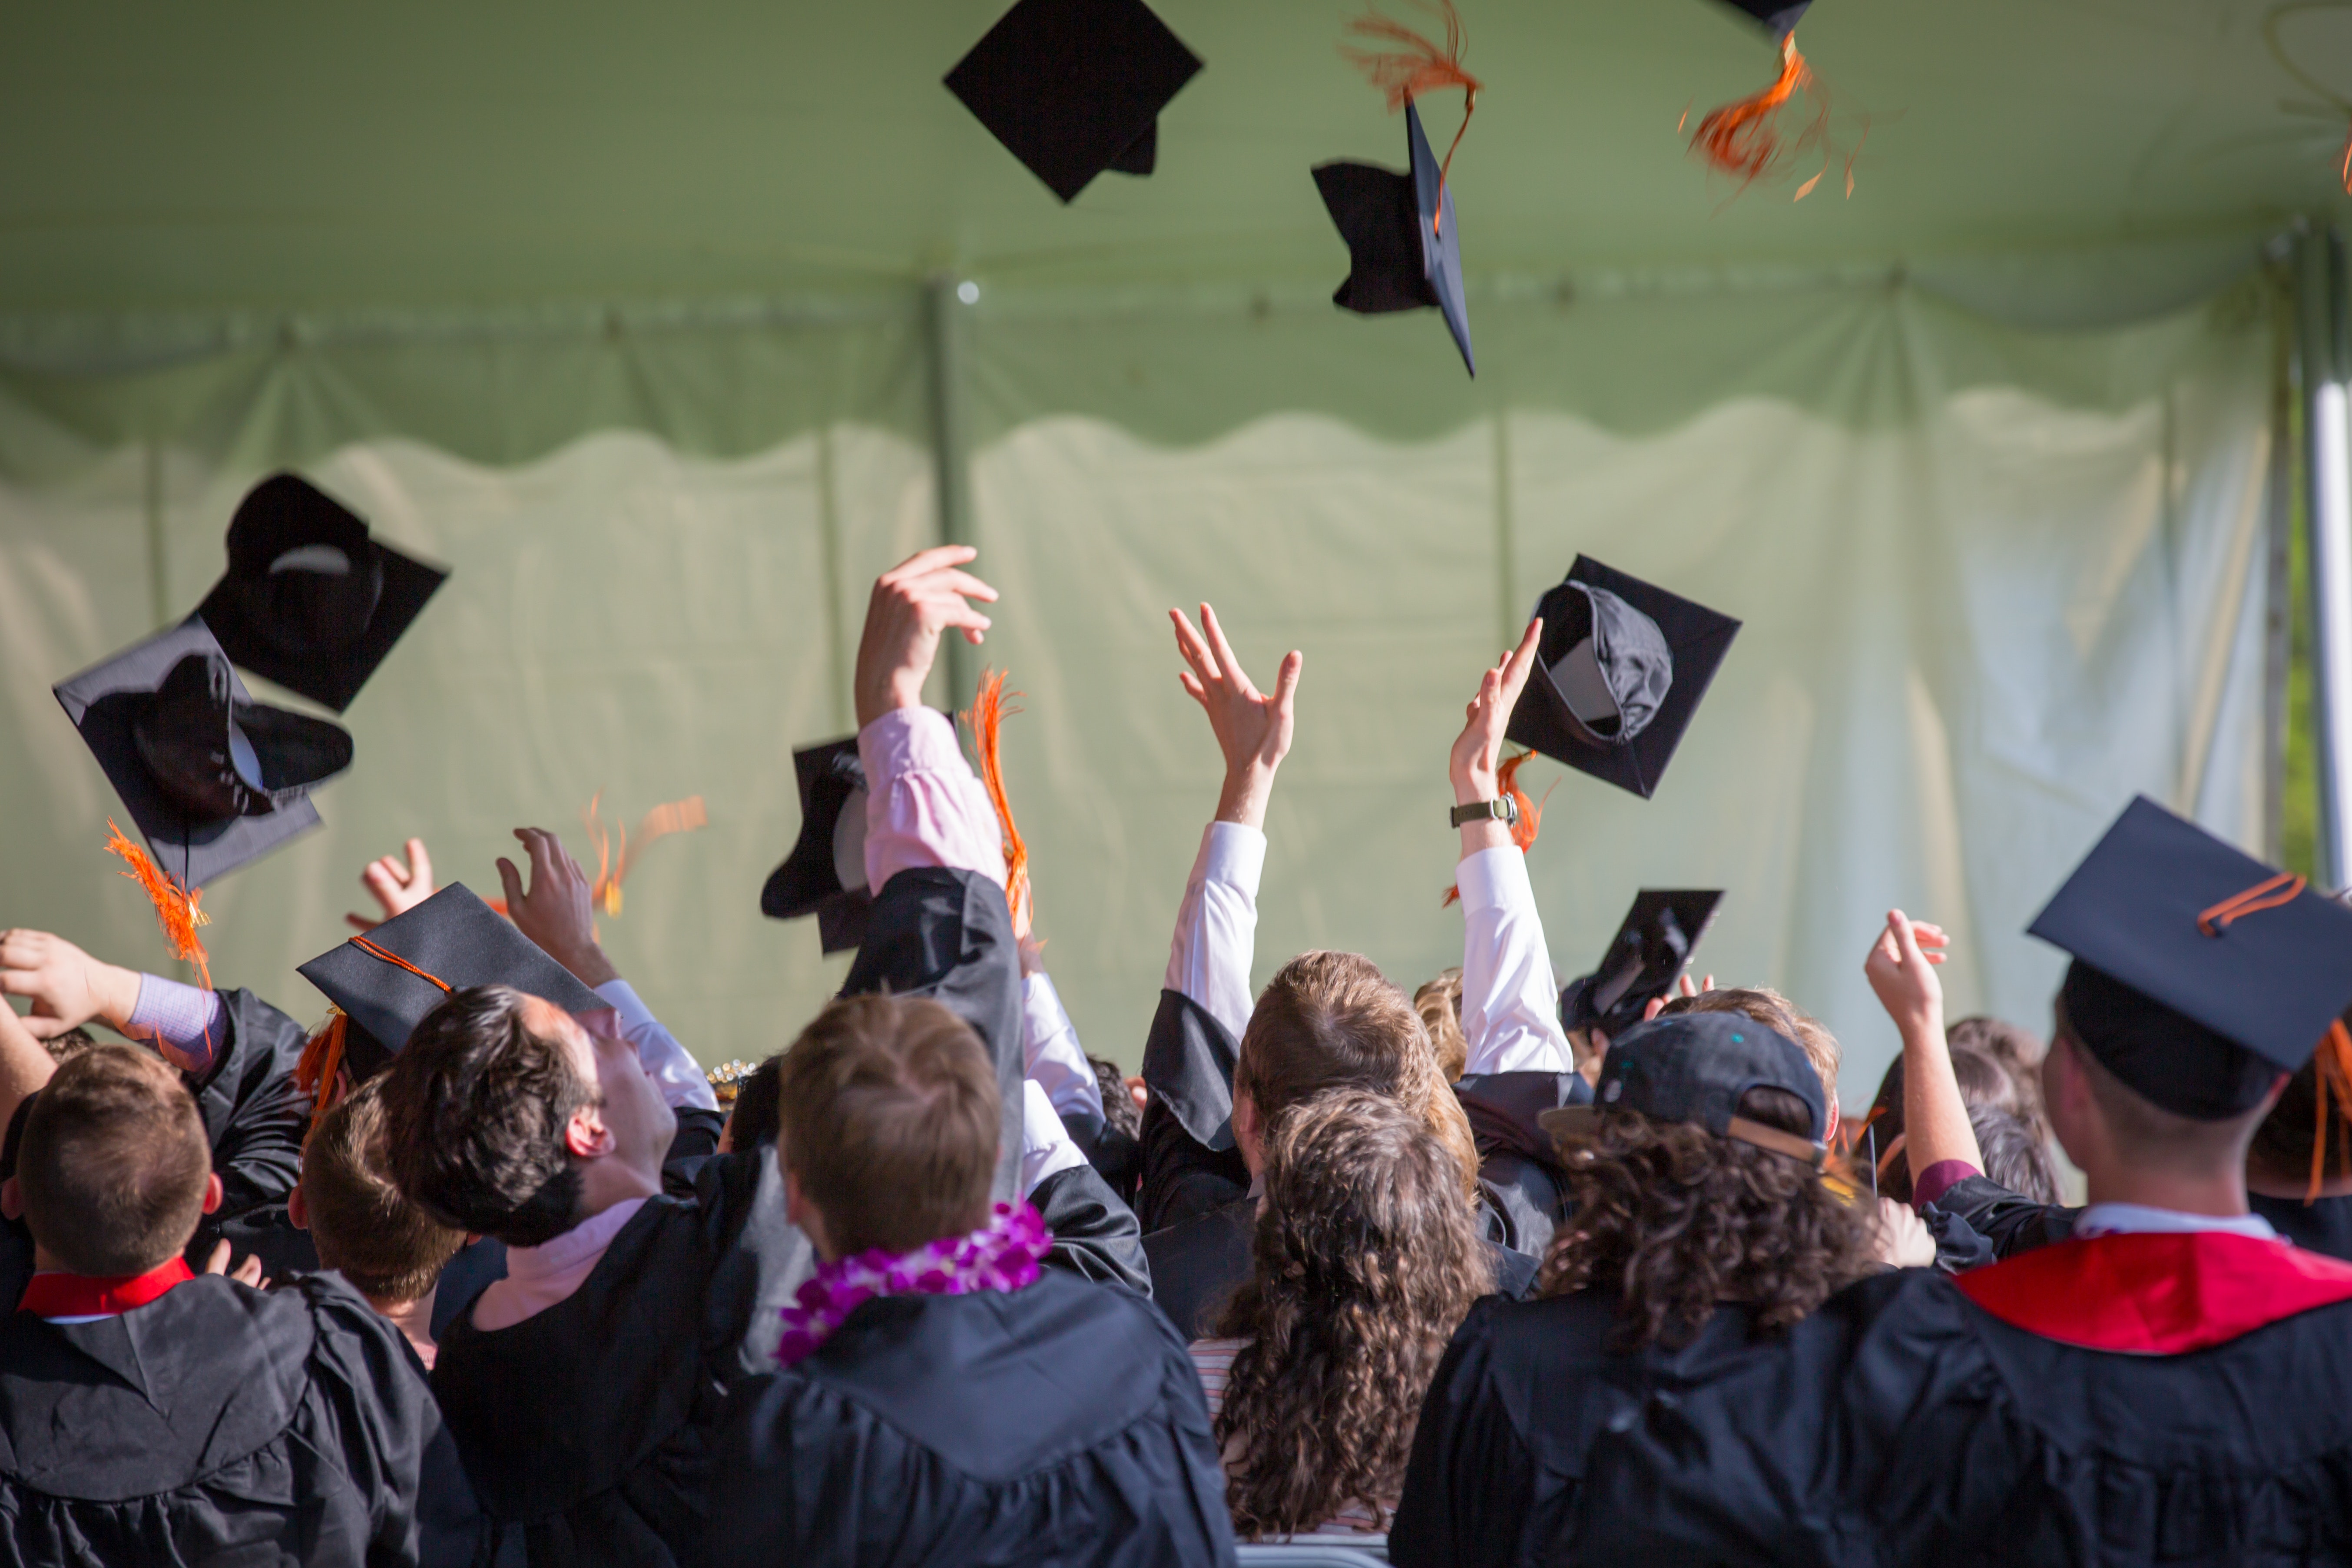 This image is from a graduation ceremony, where kids are throwing their graduation hats in the air. All the students wore black gowns.